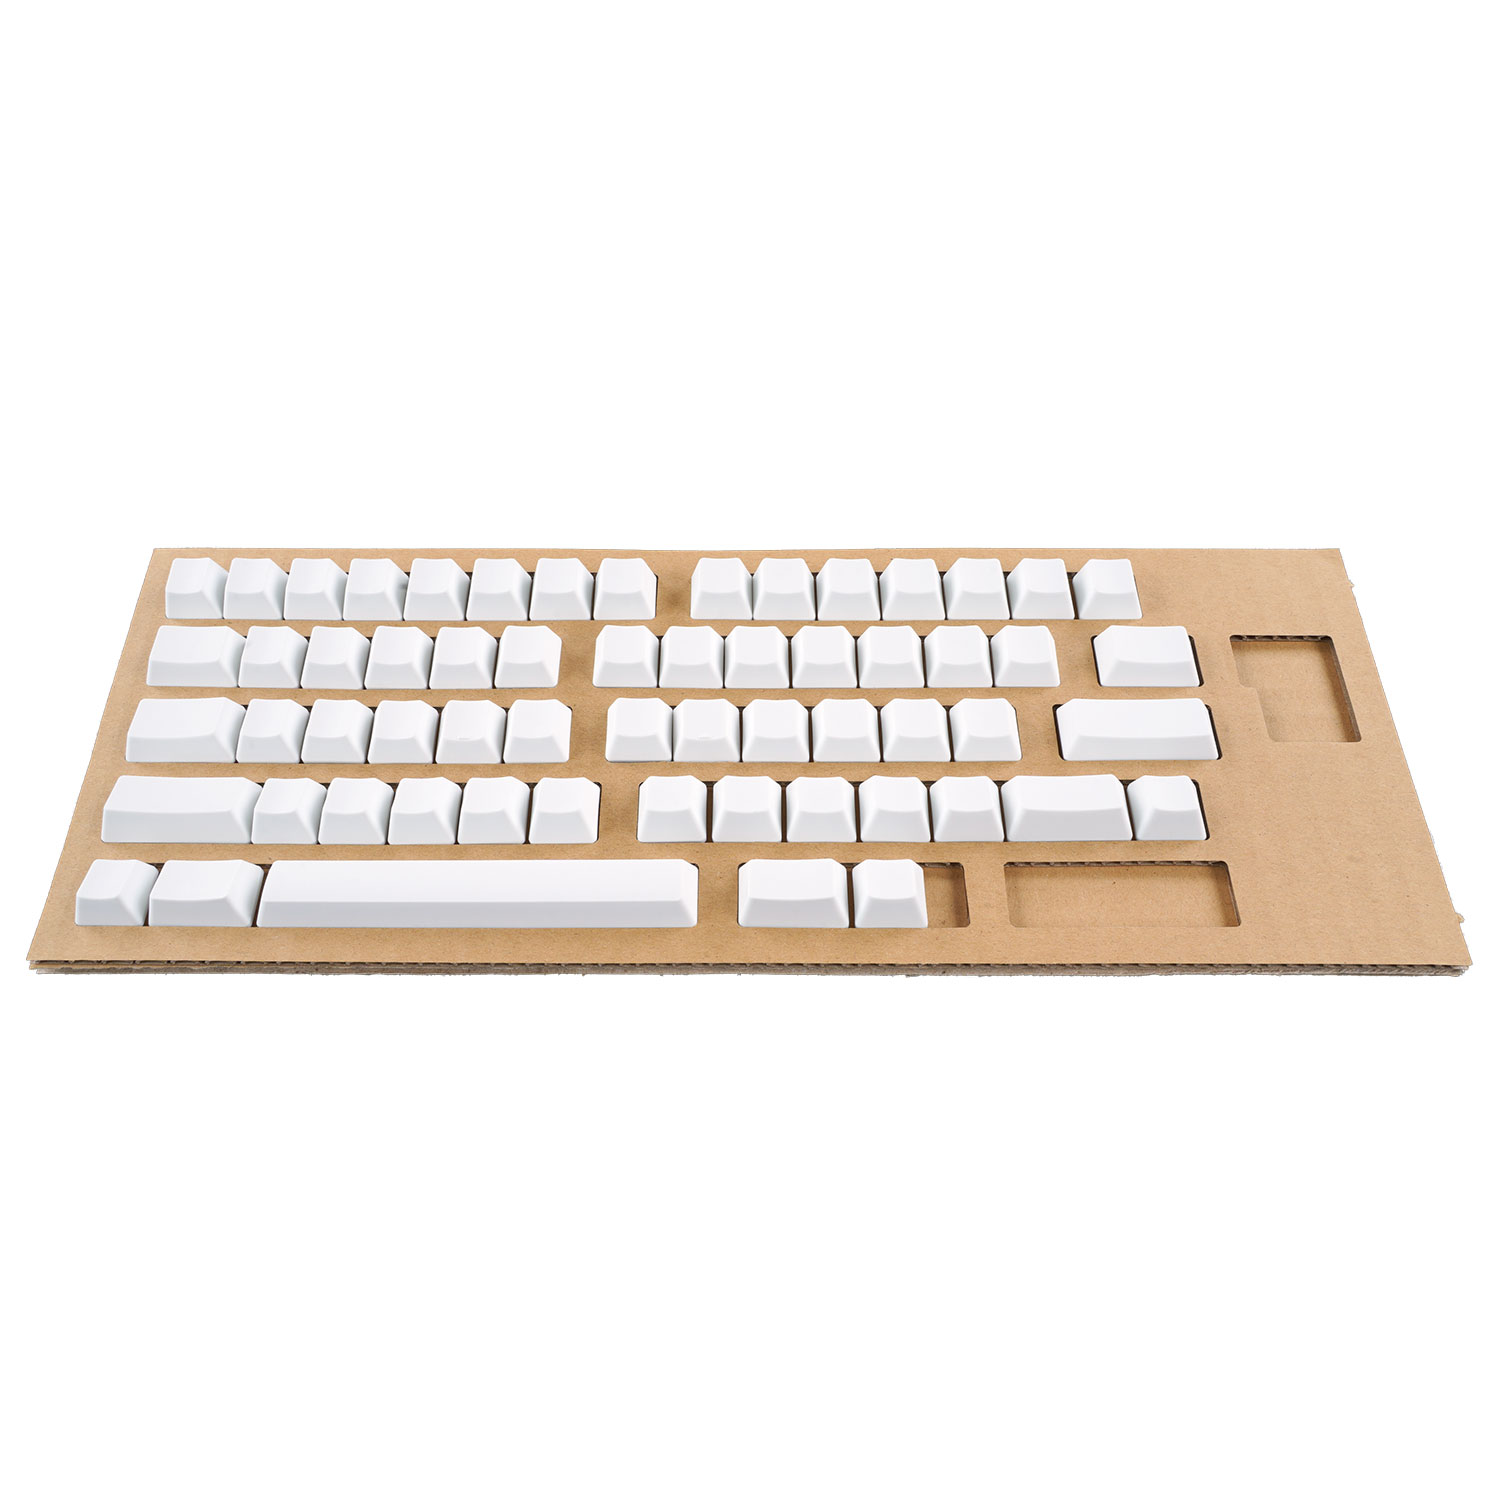 set of blank keycaps for the HHKB Snow keyboard